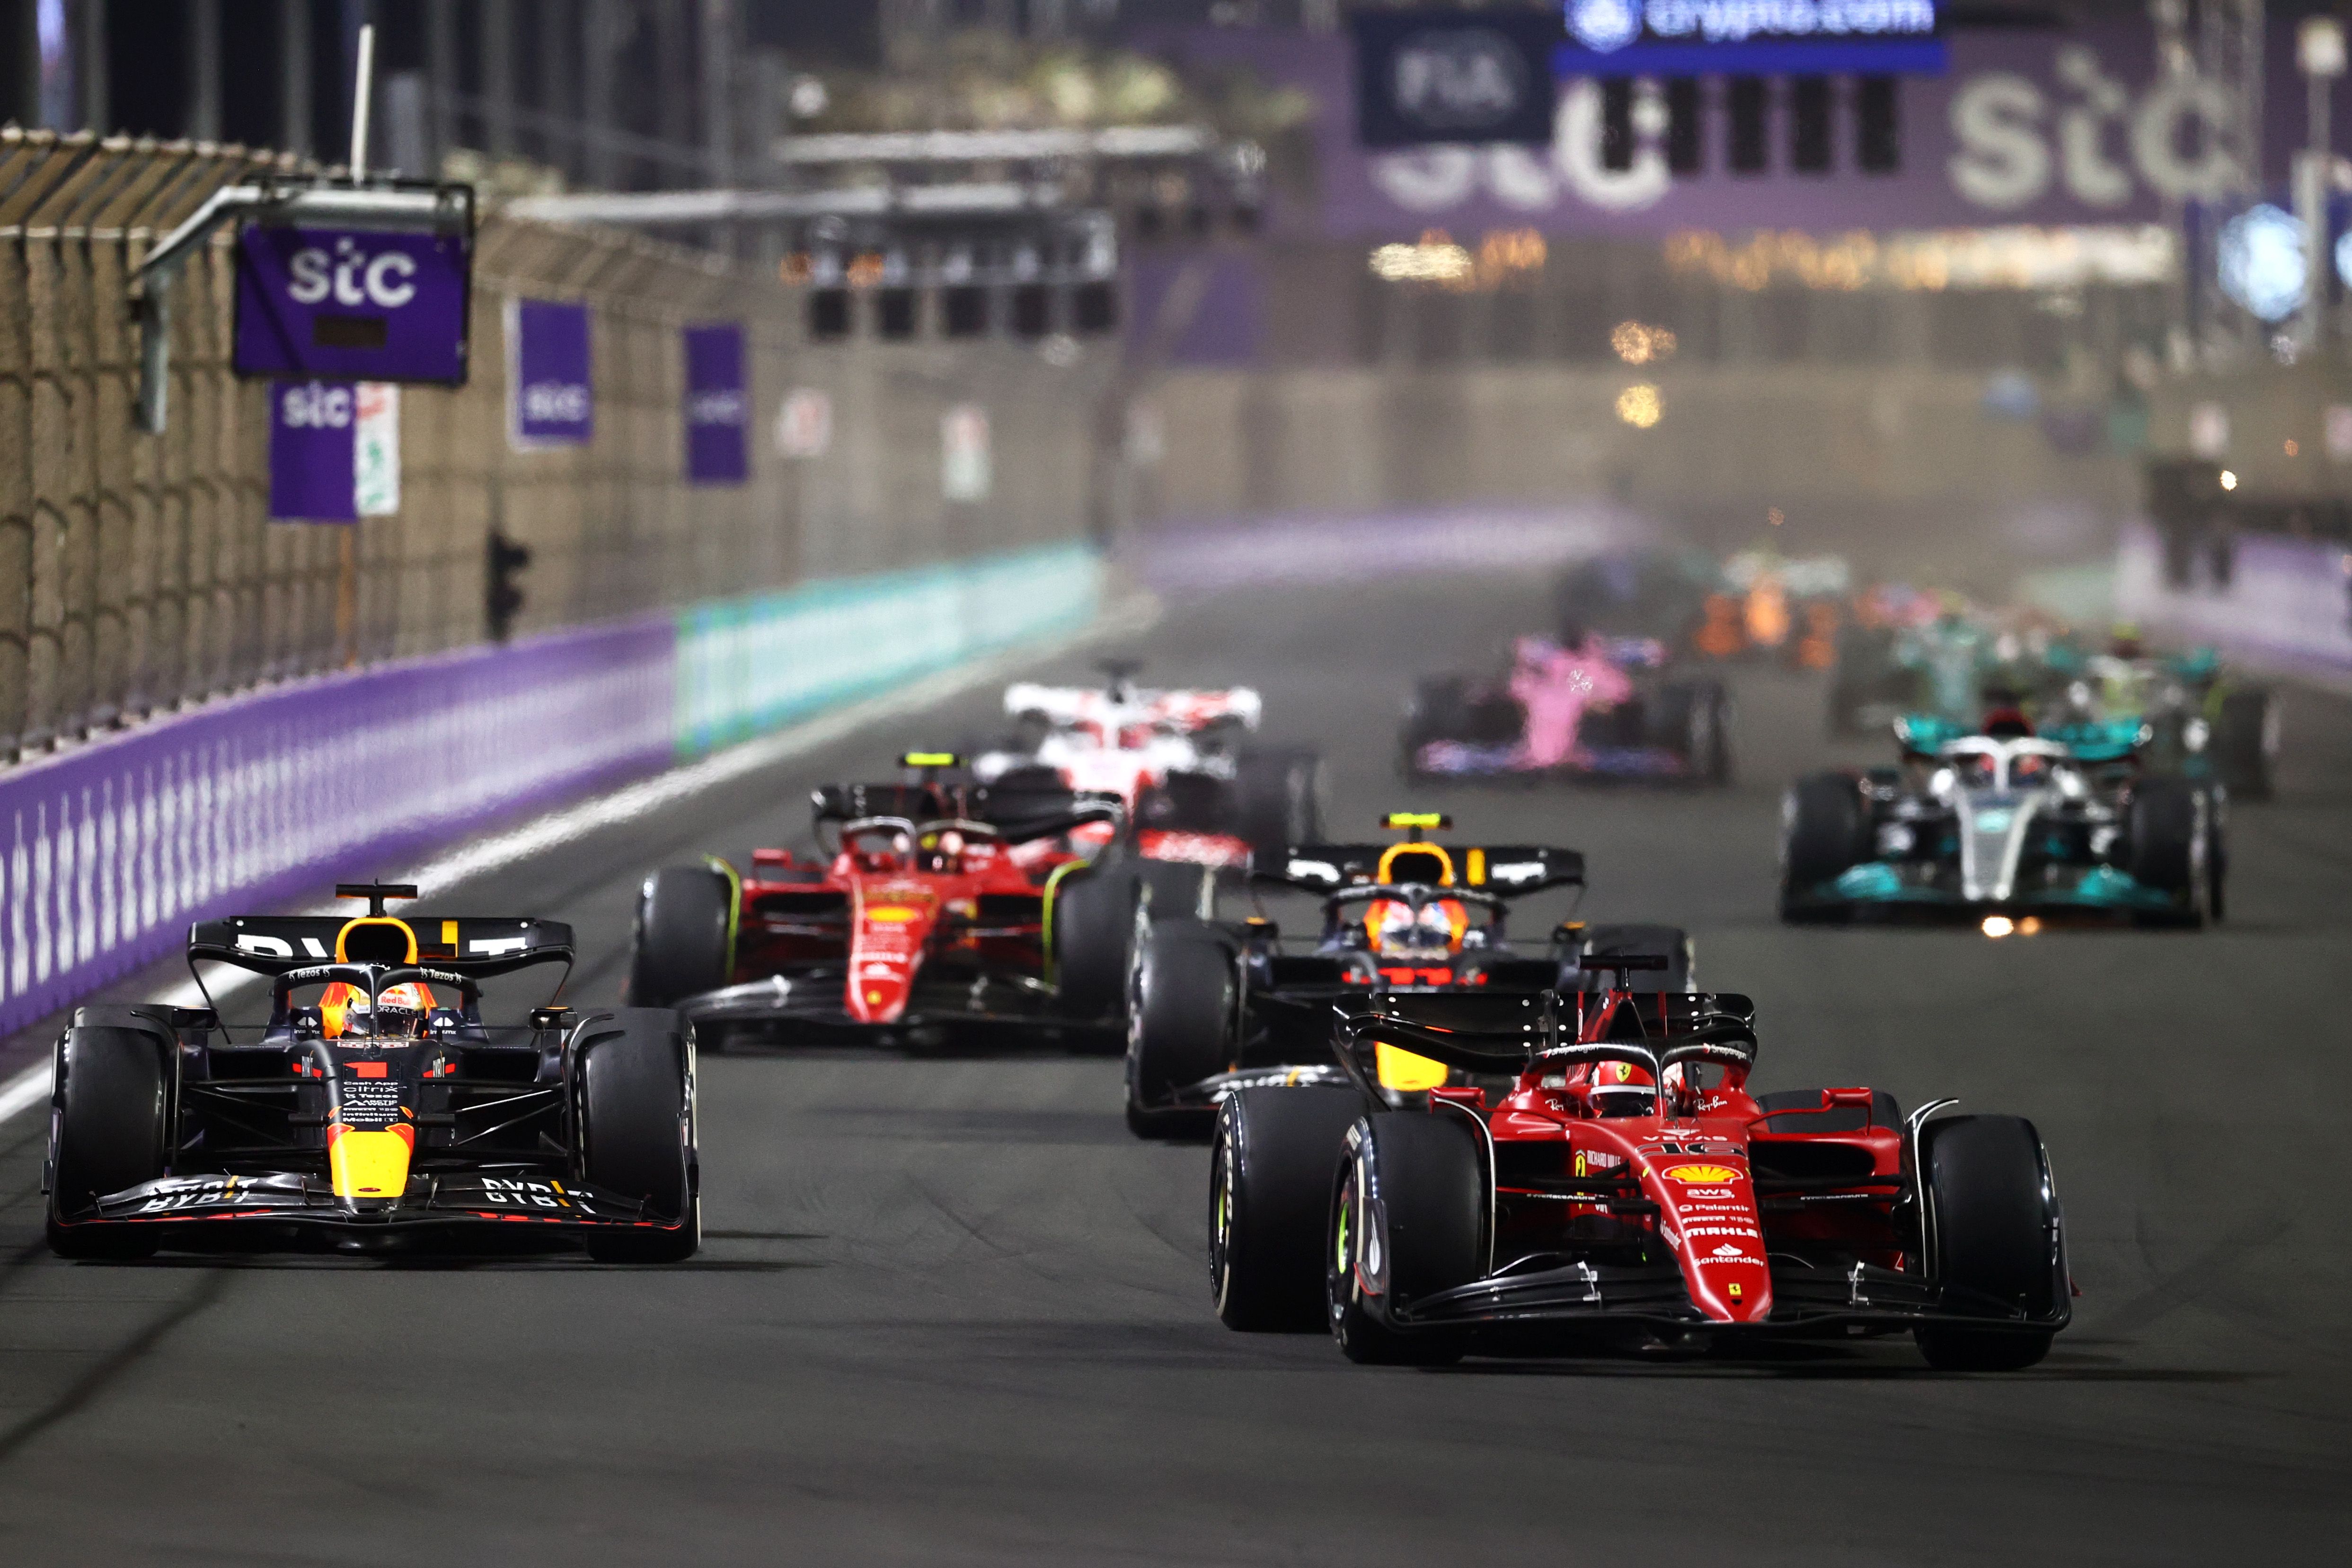 TV Ratings Say Fans Are Buying into F1s New Era